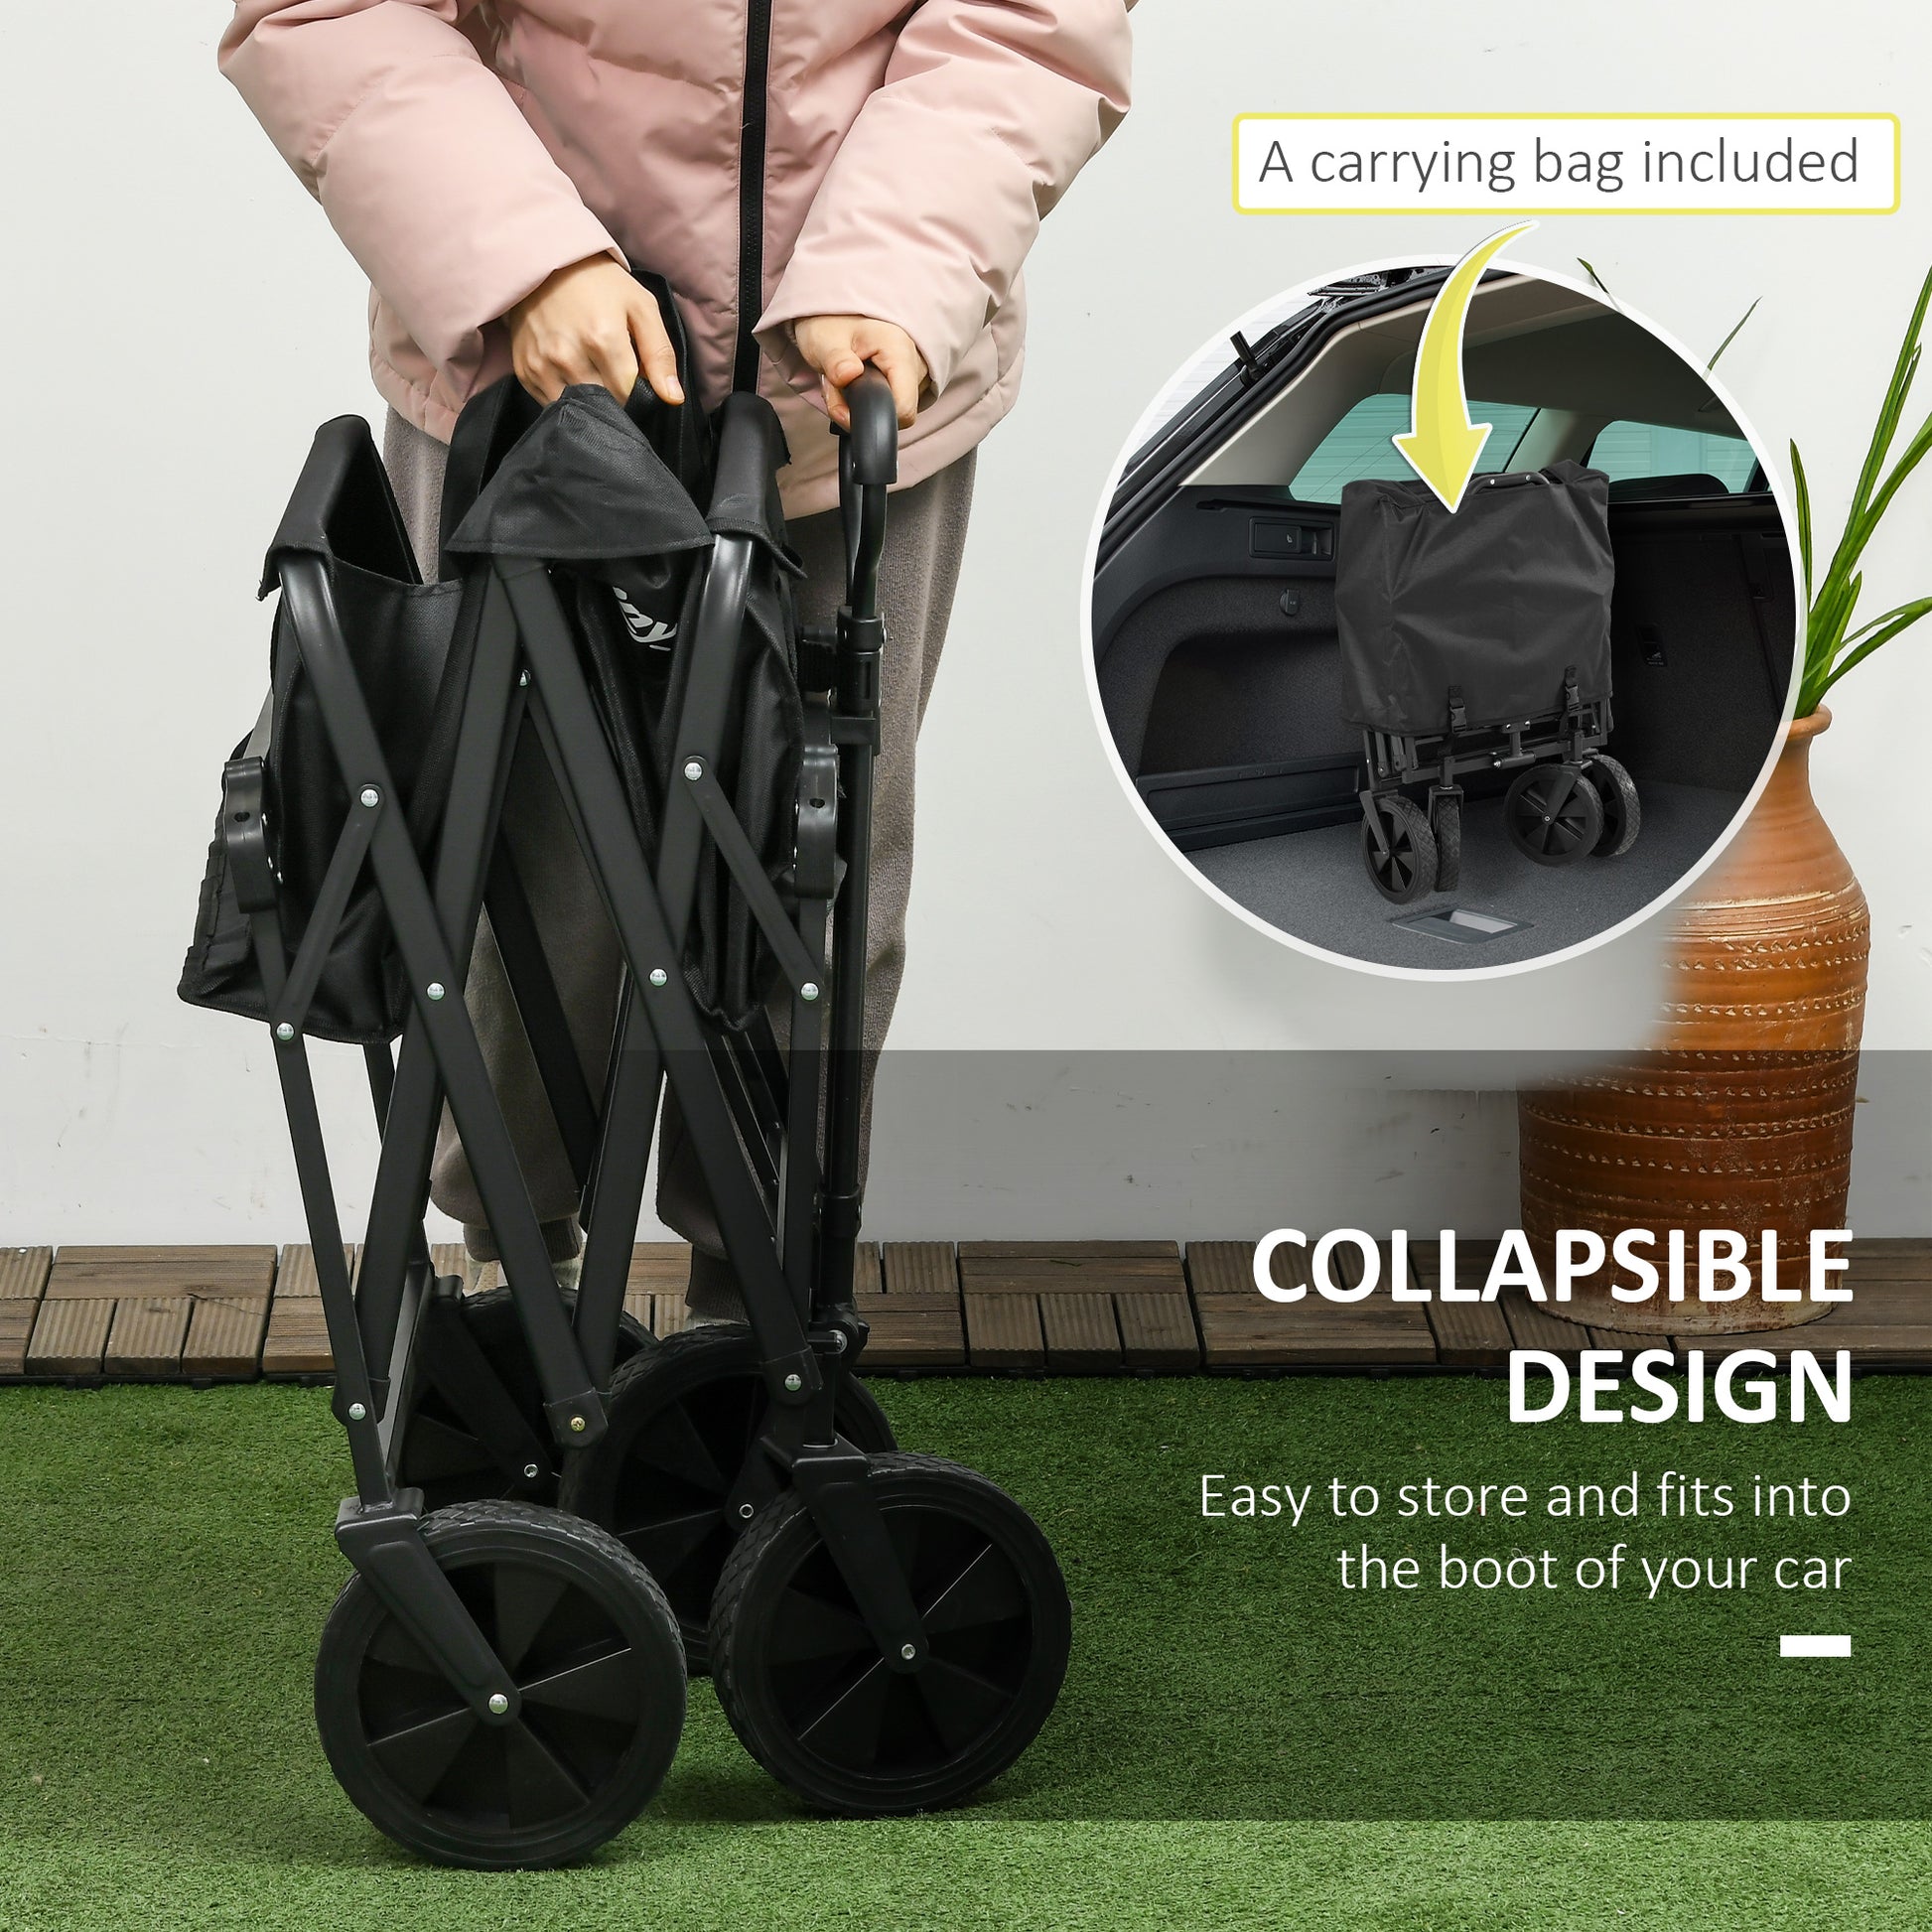 Steel Frame Folding Garden Cart, Collapsible Wagon Cart with Removable Canopy, Telescopic Handle and Carrying Bag - Gallery Canada